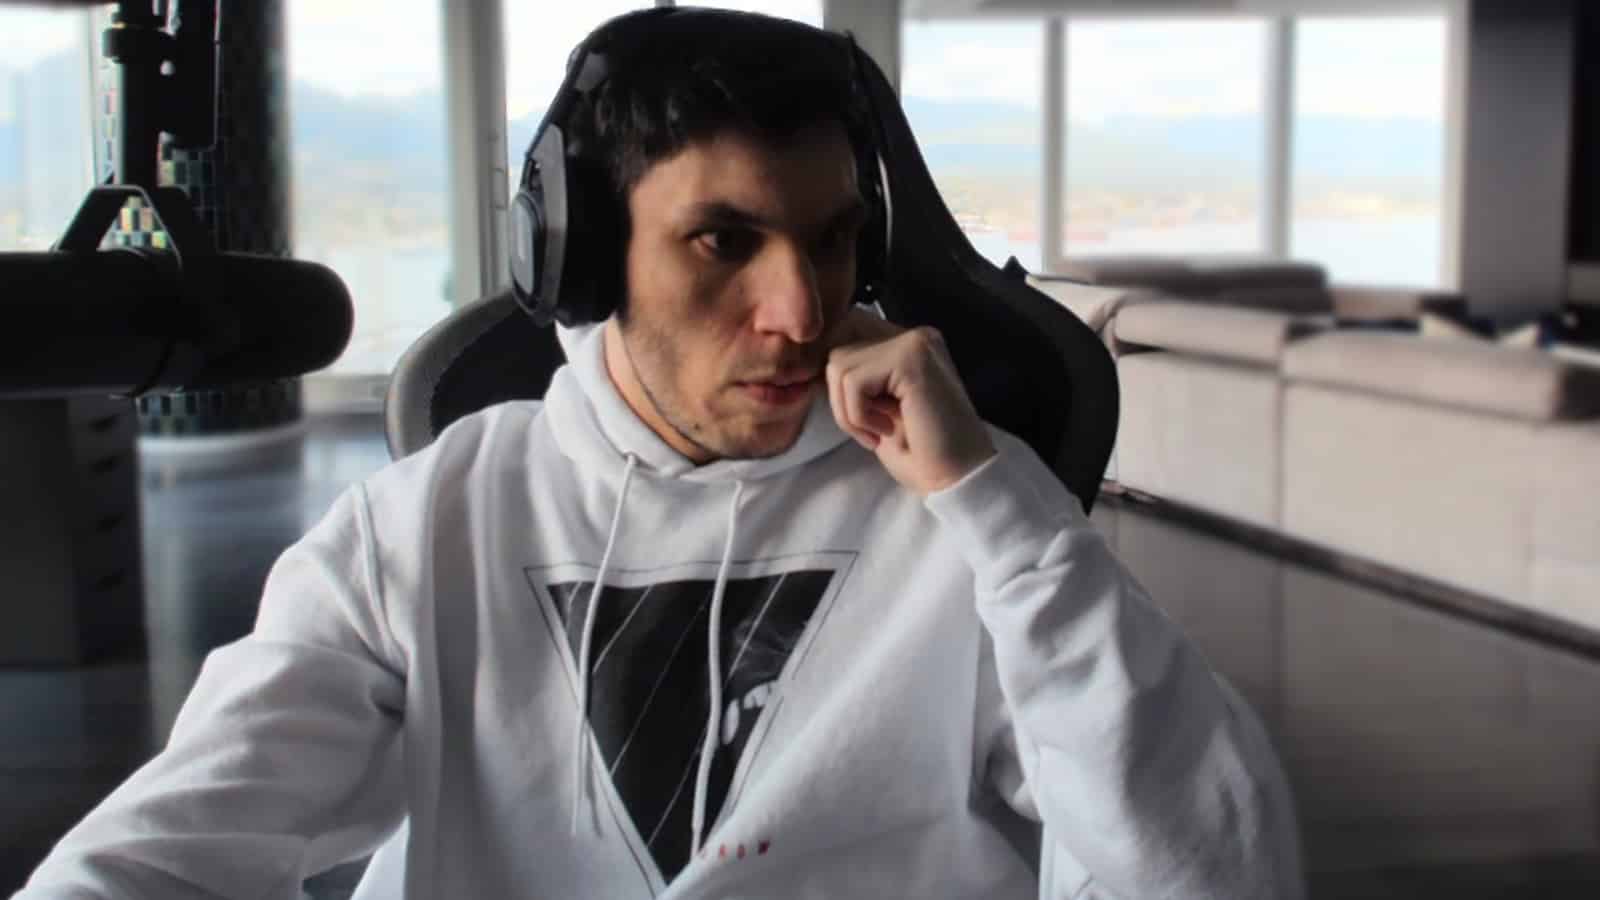 Trainwrecks stares to the side on his Twitch stream amid gambling controversy.